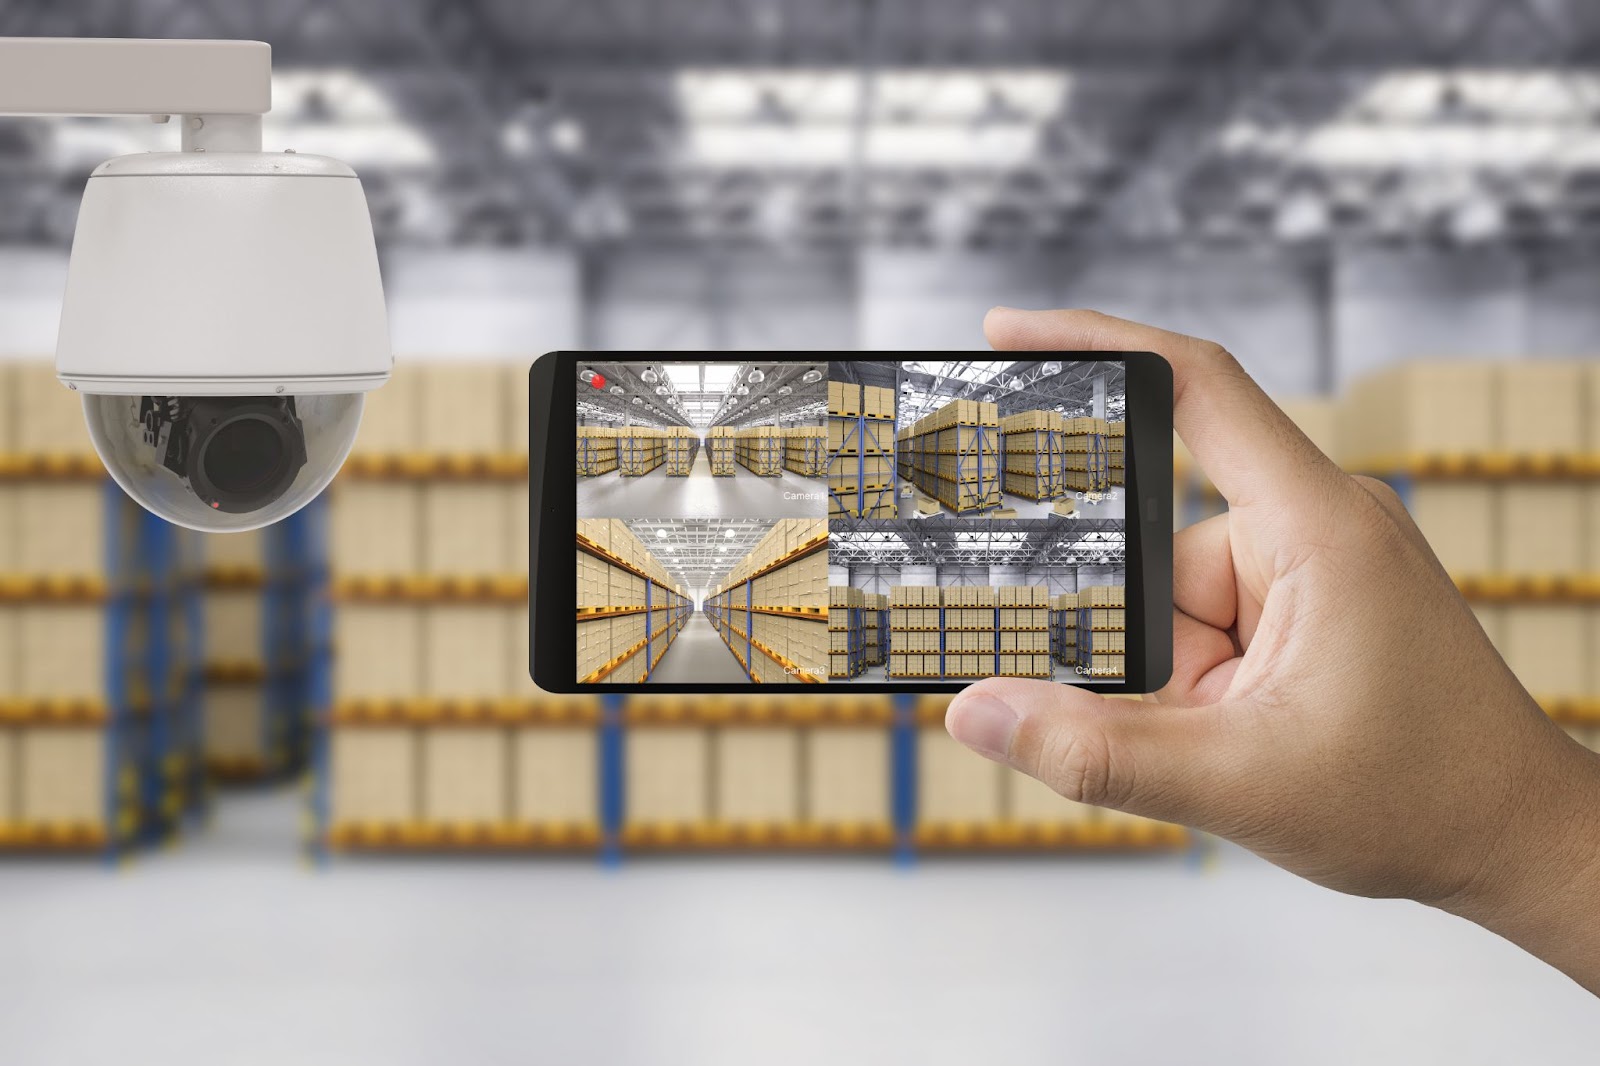 Hand holding a smartphone with a live security camera feed of warehouse shelves, highlighting surveillance technology.